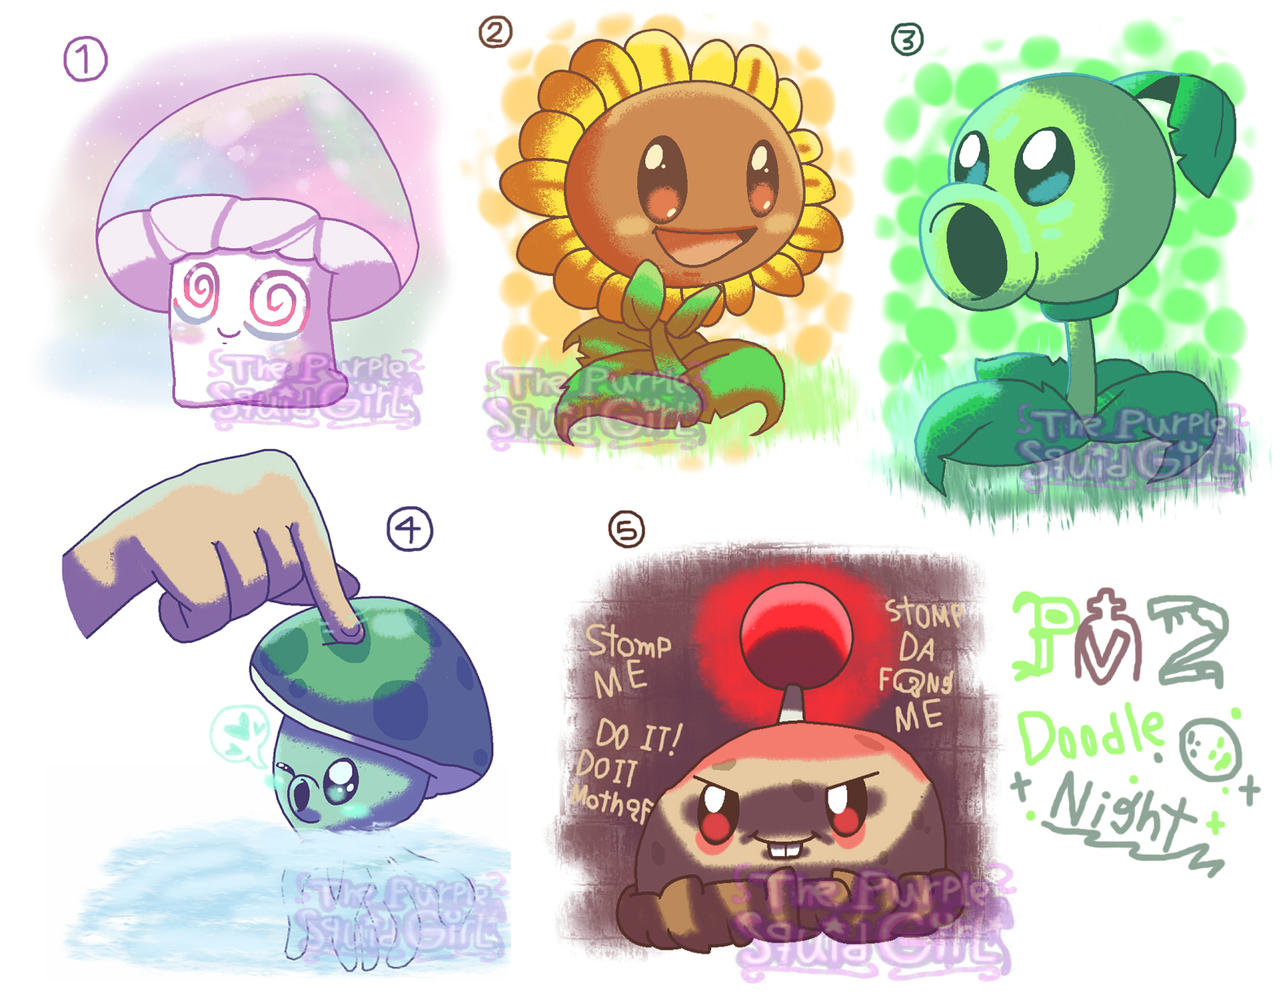 Plants vs Zombies 3 by TheThingRed on DeviantArt